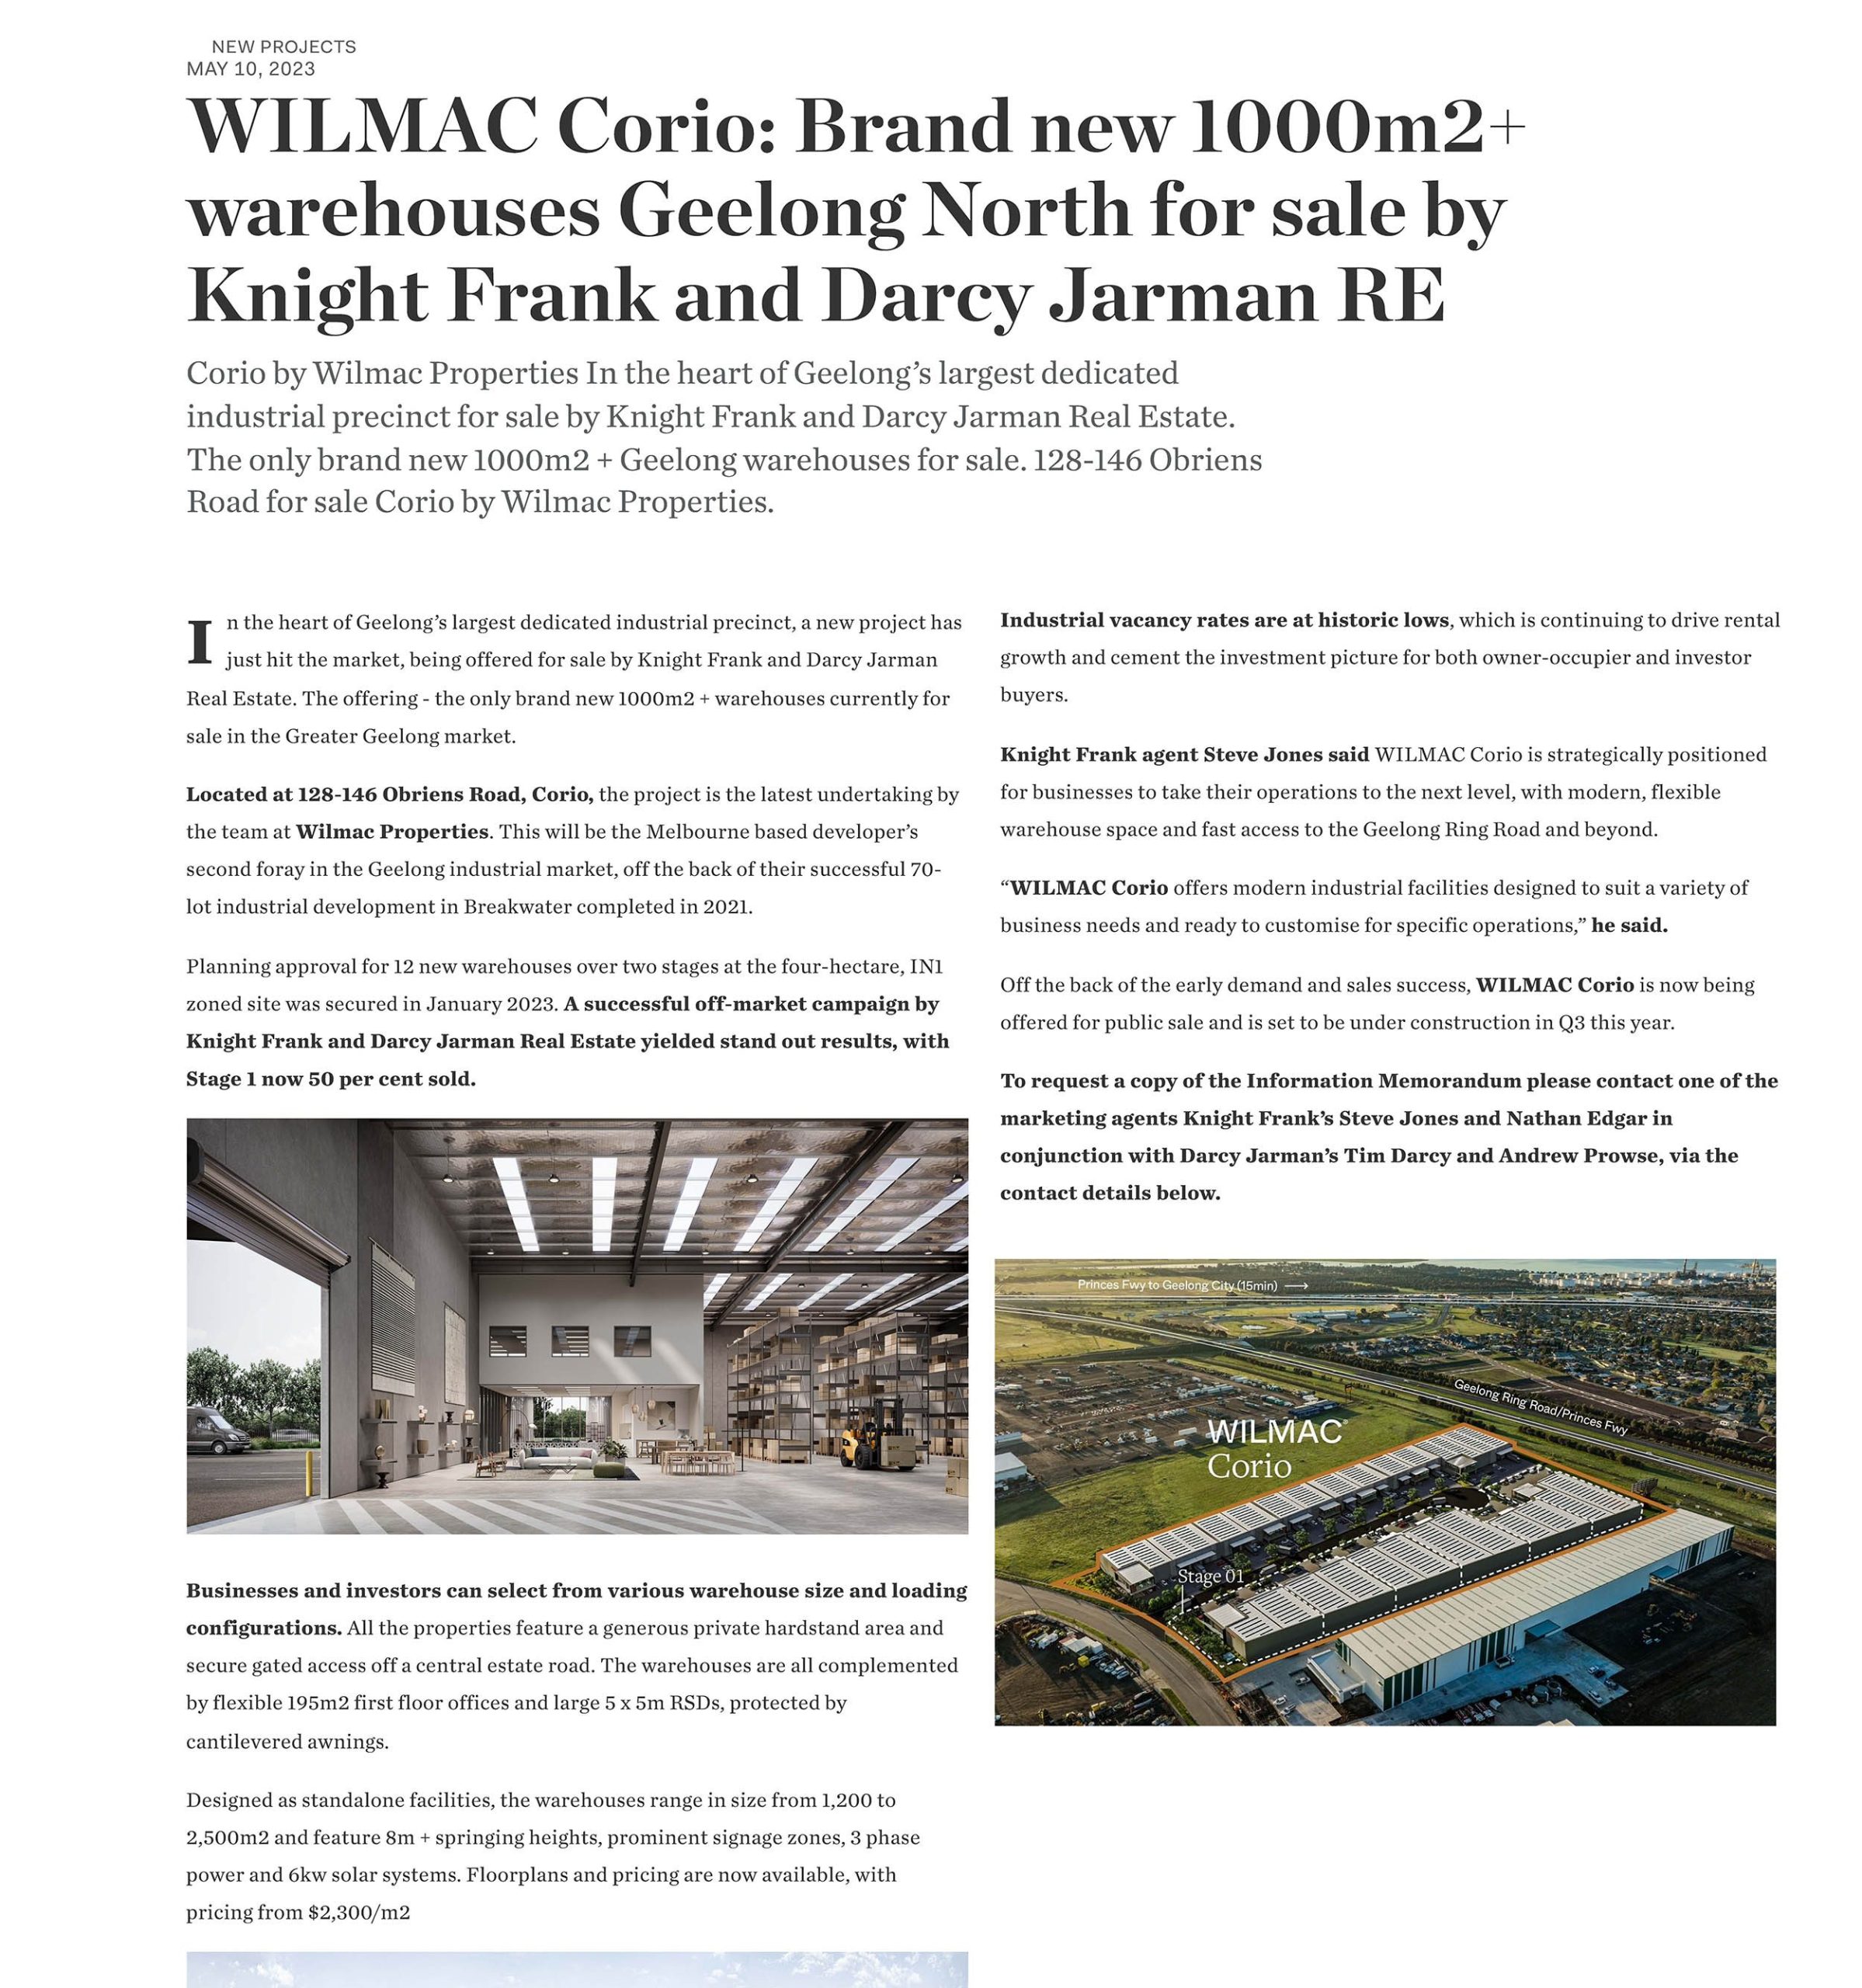 WILMAC Corio: Brand new 1000m2+ warehouses Geelong North for sale by Knight Frank and Darcy Jarman Real Estate